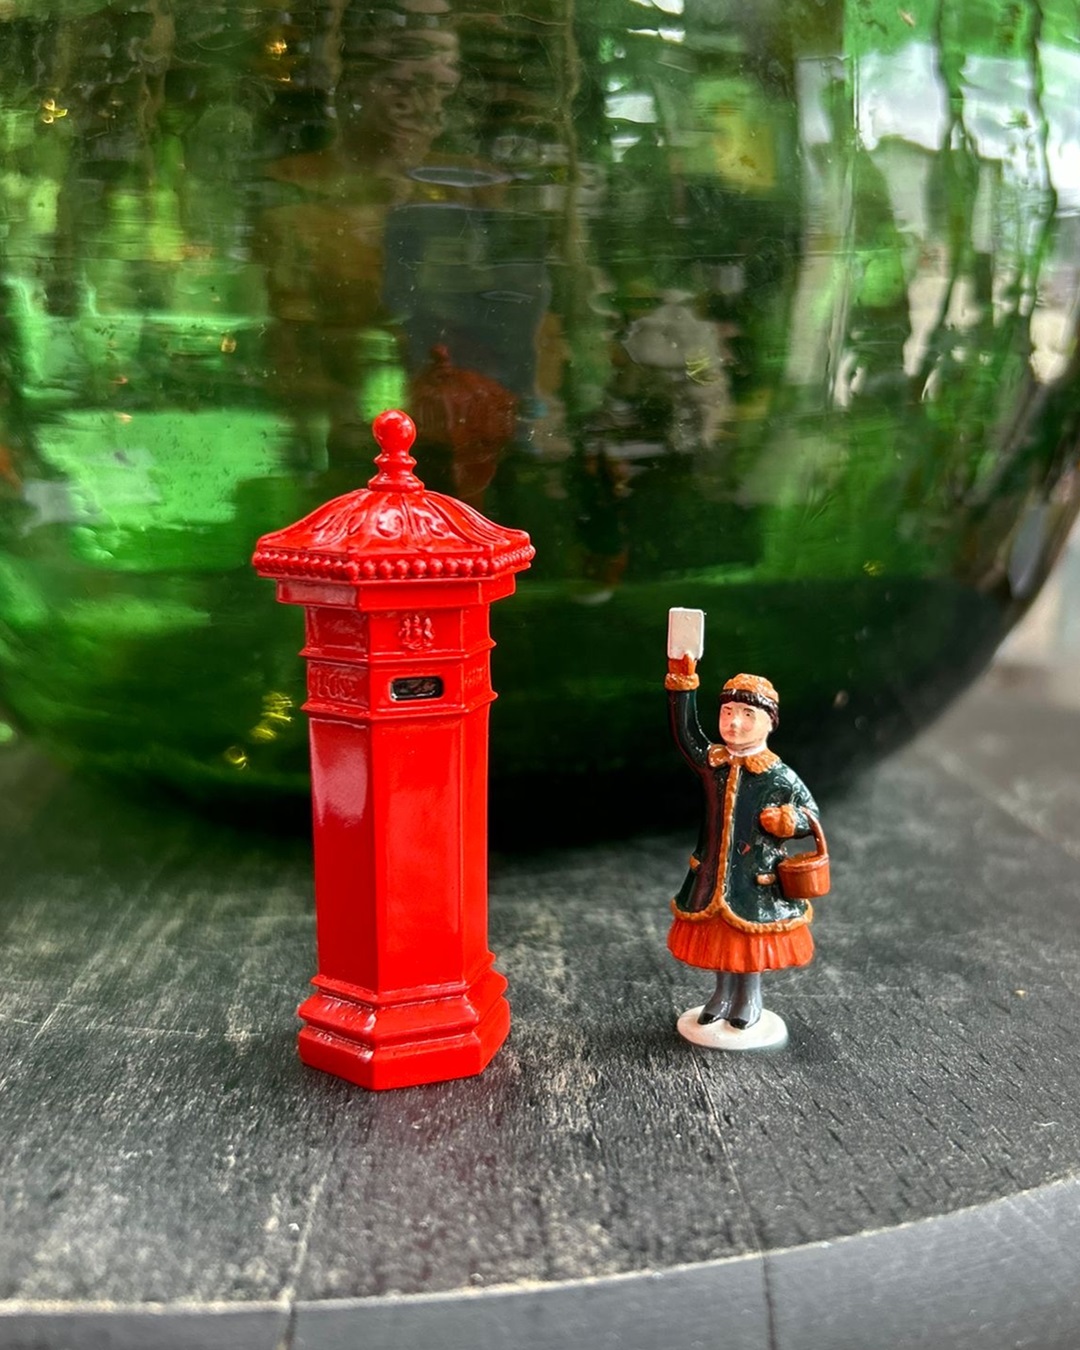 Red letter box and girl posting letter ornament on bench with green glass vase behind